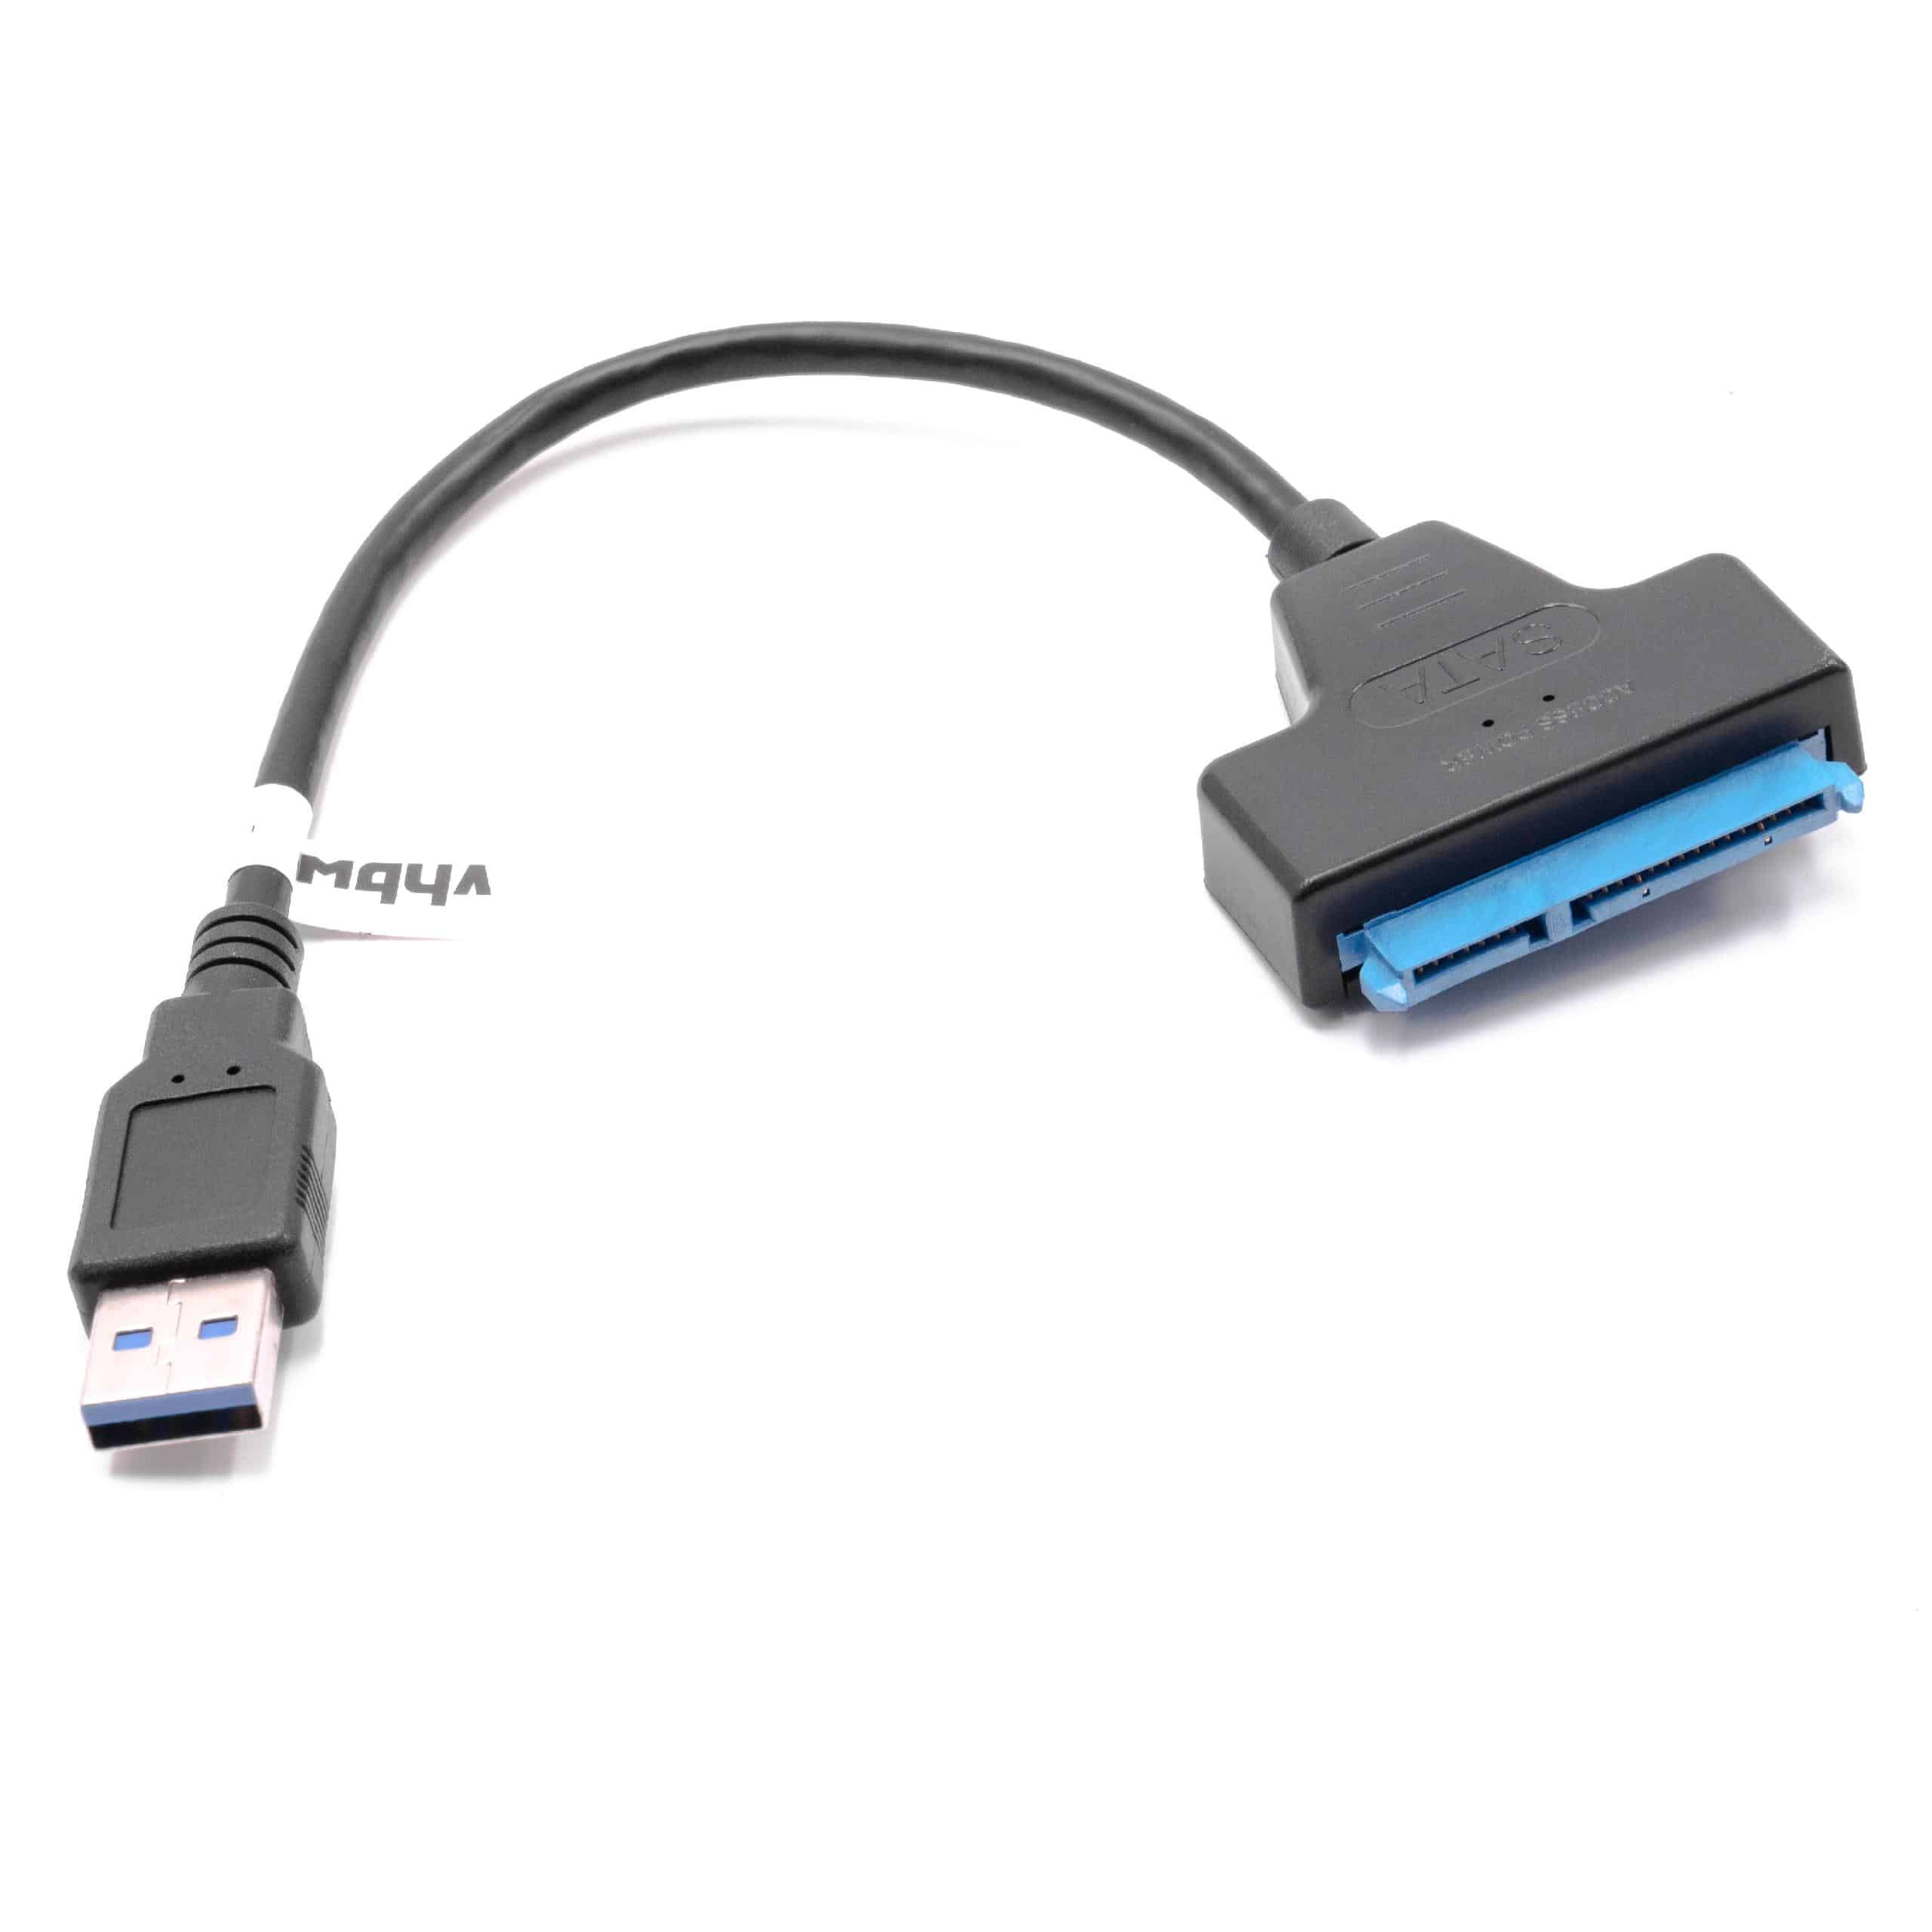 SATA III to USB 3.0 External Hard Drive Adapter Cable for HDD, SSD External Hard Drives, Plug-and-Play black /